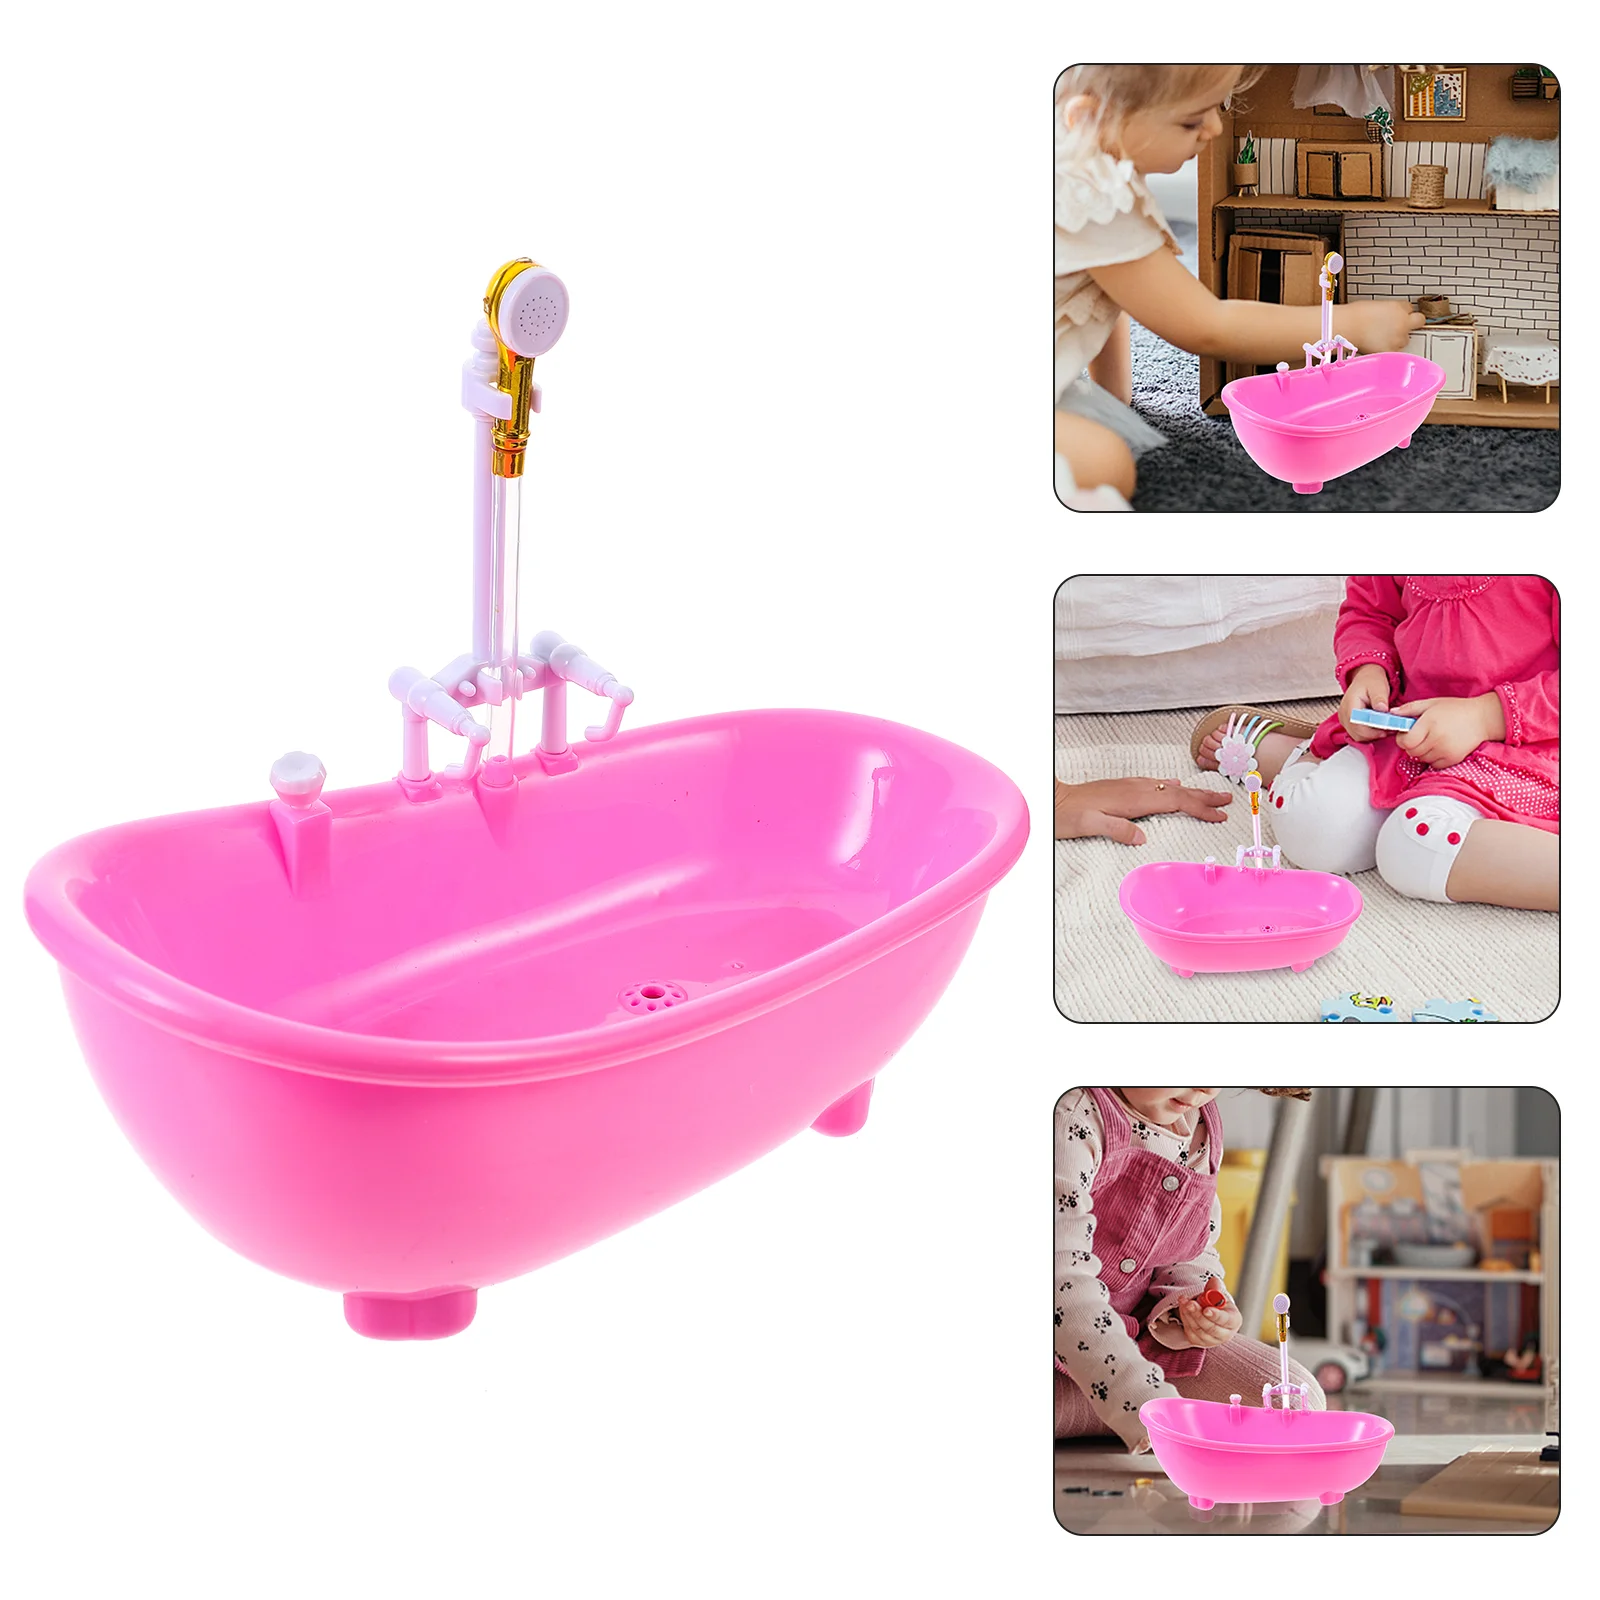 Electric water spraying bathtub show swimming pool with sprayer without for boys thumb200